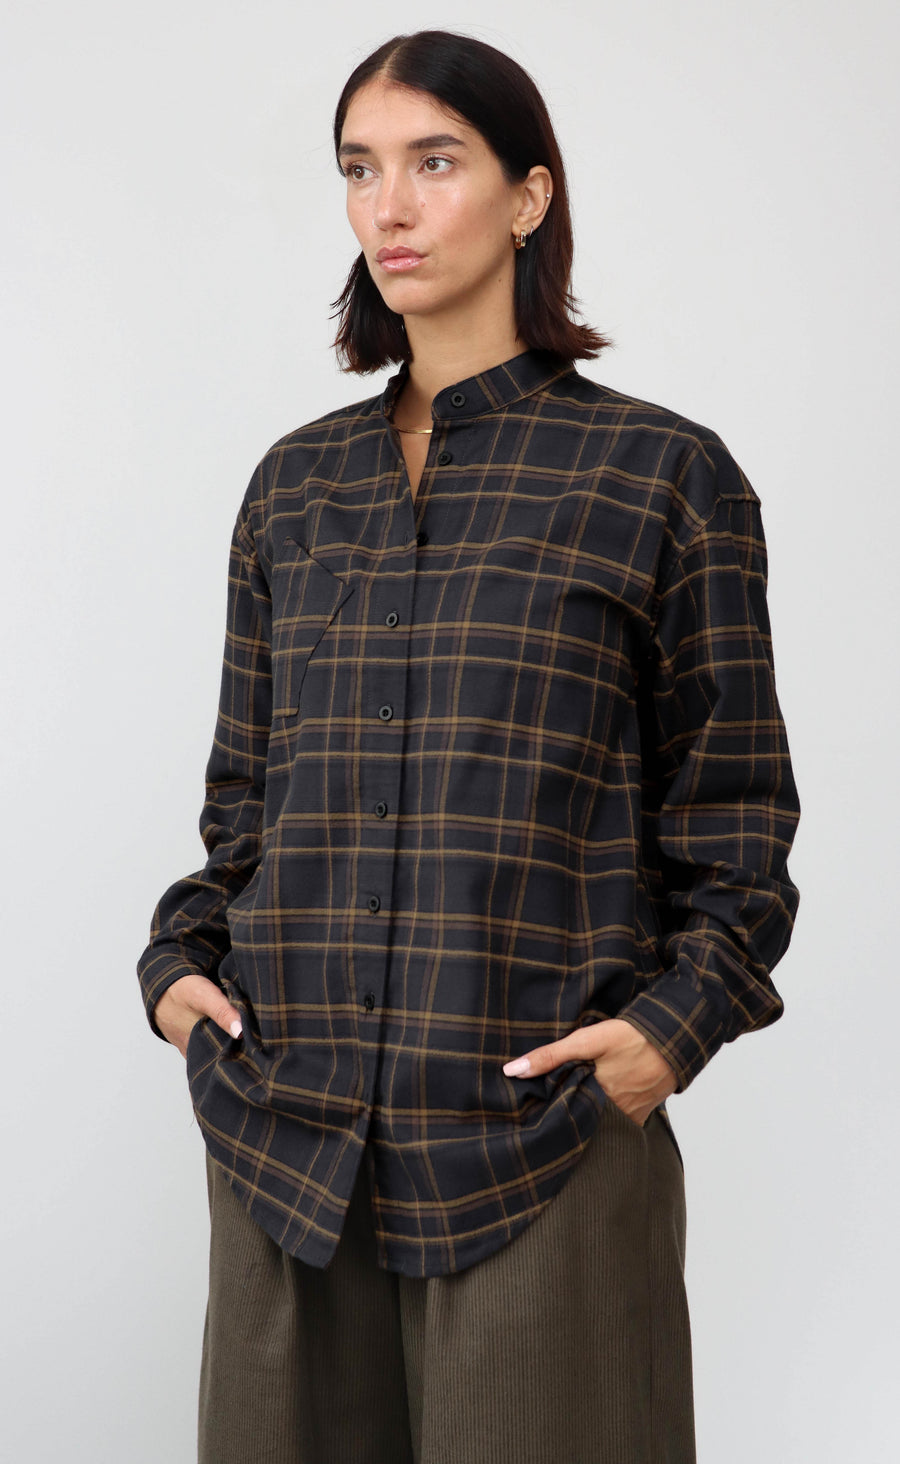 The Gentlewoman - Wayward Fit Tunic - Plaid Flannel